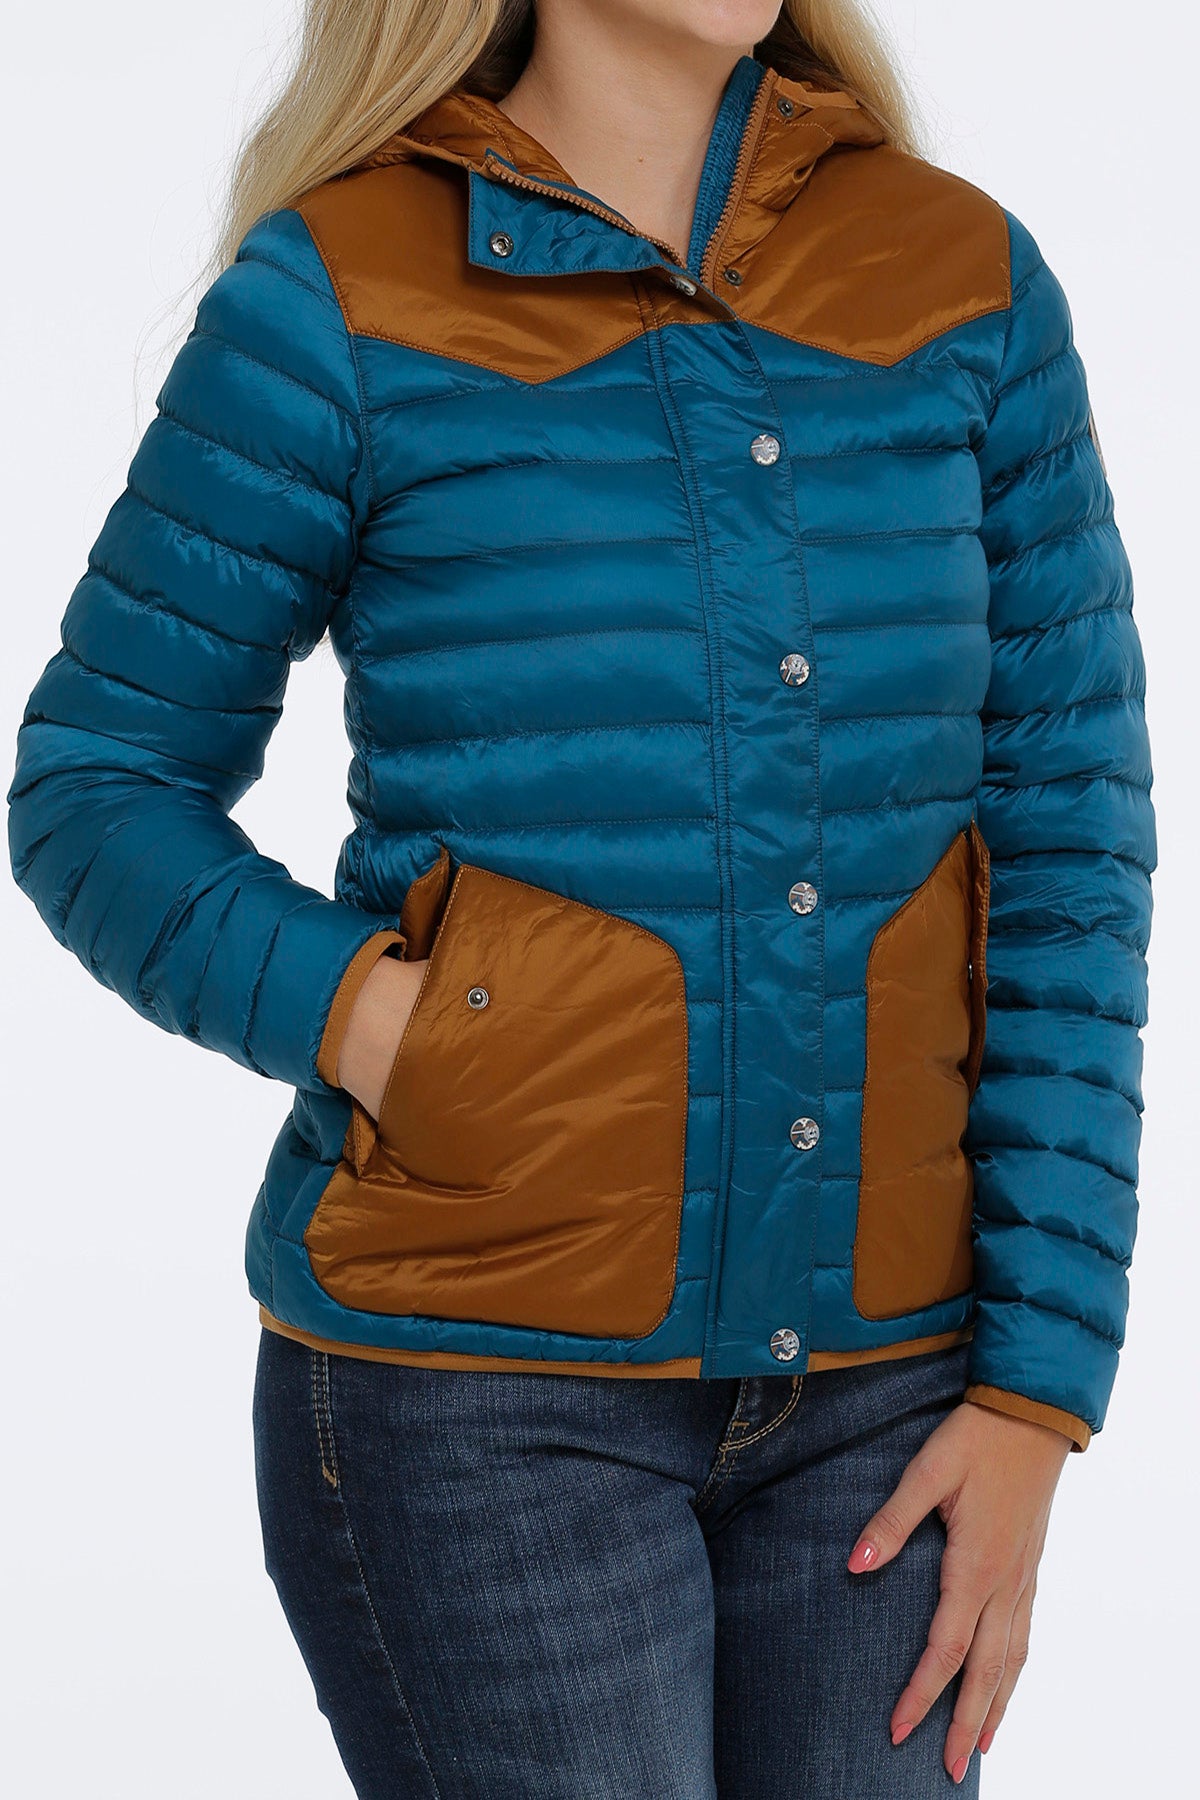 CINCH Women's Quilted Jacket